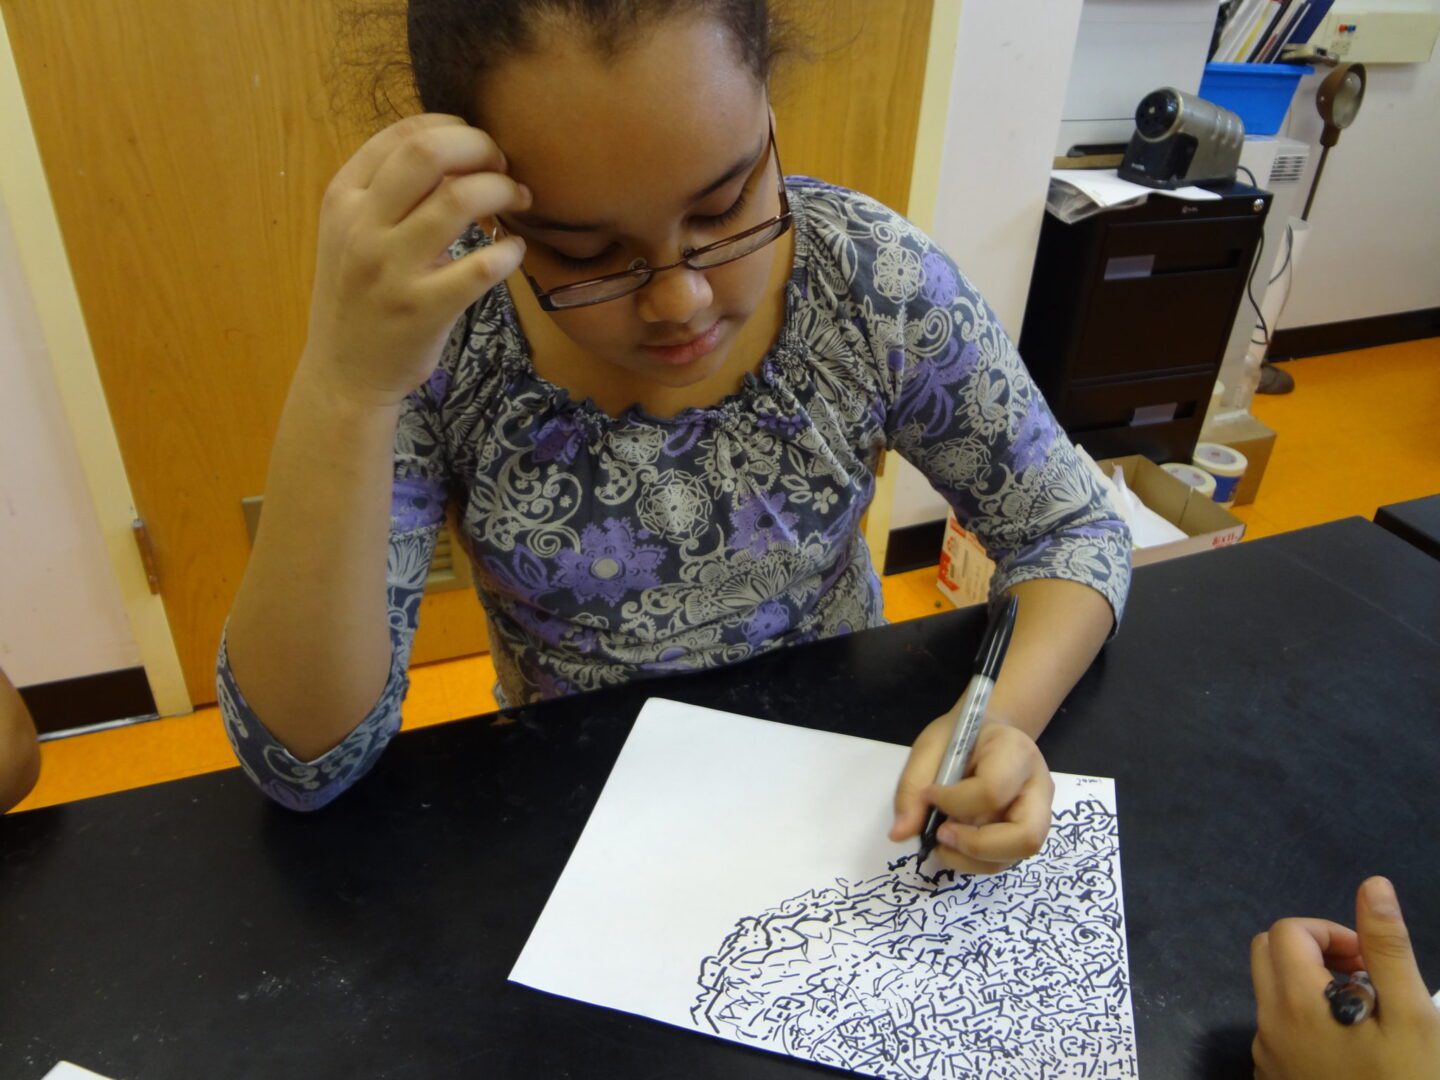 A girl is drawing on a piece of paper.